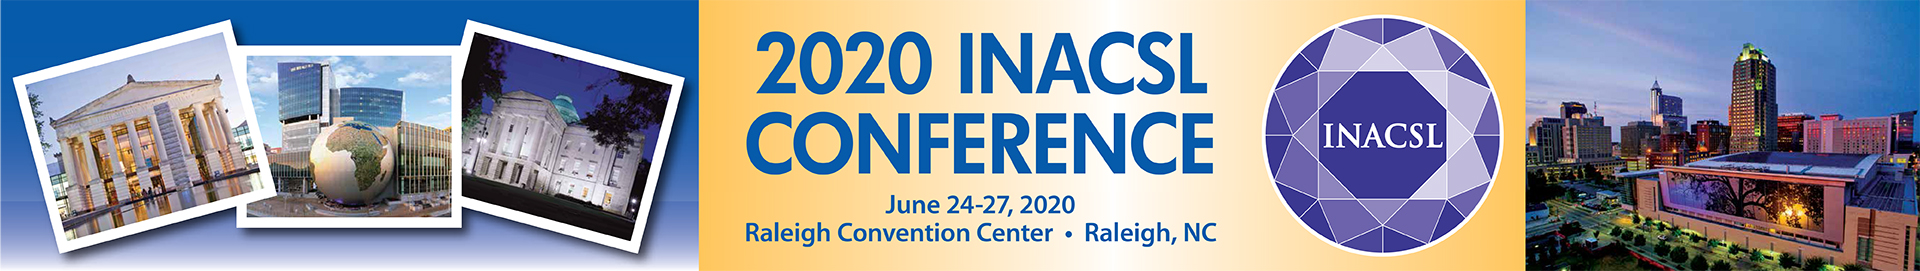 INACSL Conference, 2020 Event Banner